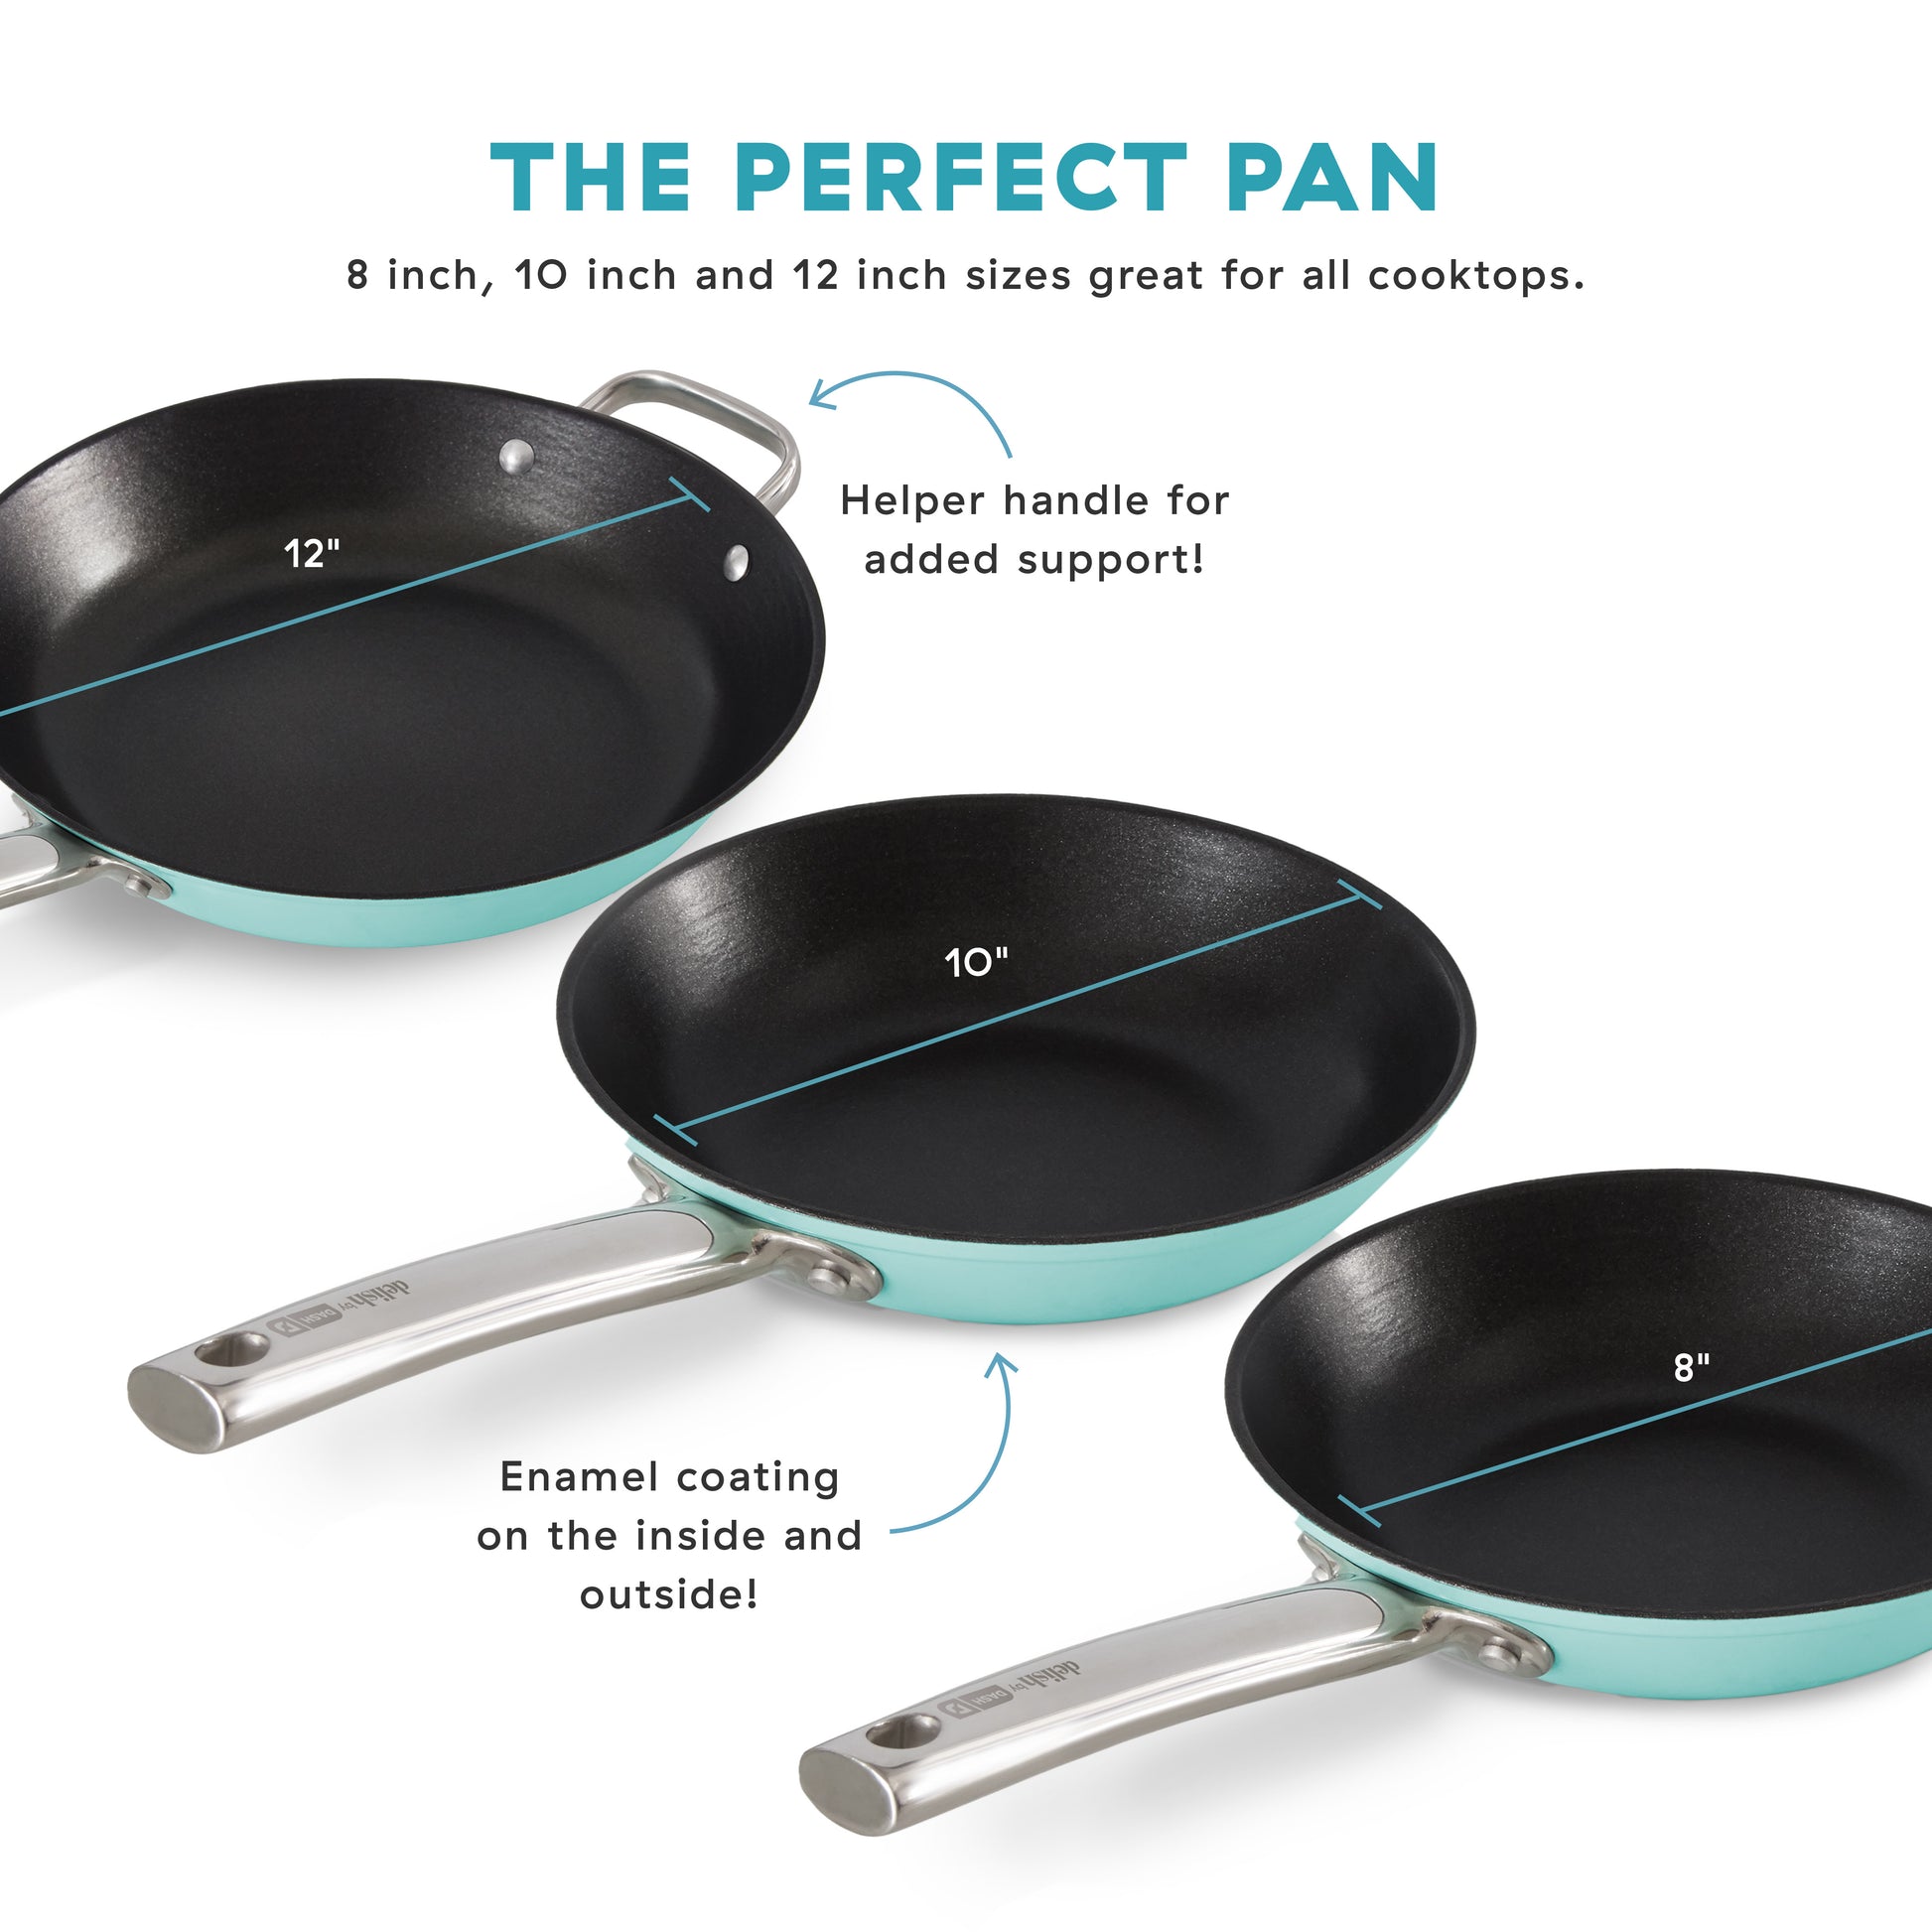 Dash 8 Electric Mini Skillet only $19.98